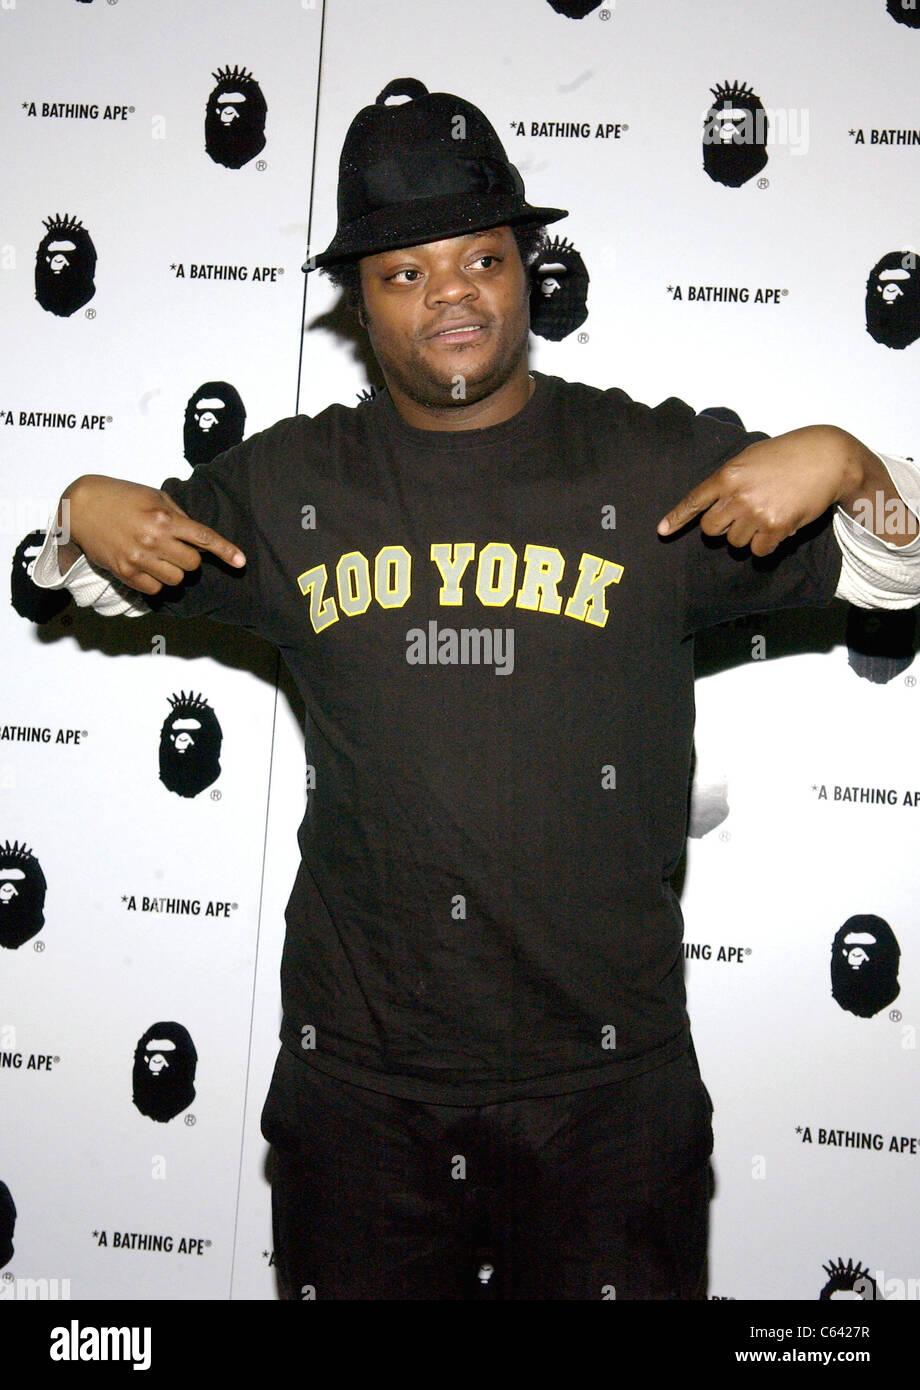 Harold Hunter at the store opening of A Bathing Ape, New York, NY January  11, 2005. Photo by: David Blackman/Everett Collection Stock Photo - Alamy